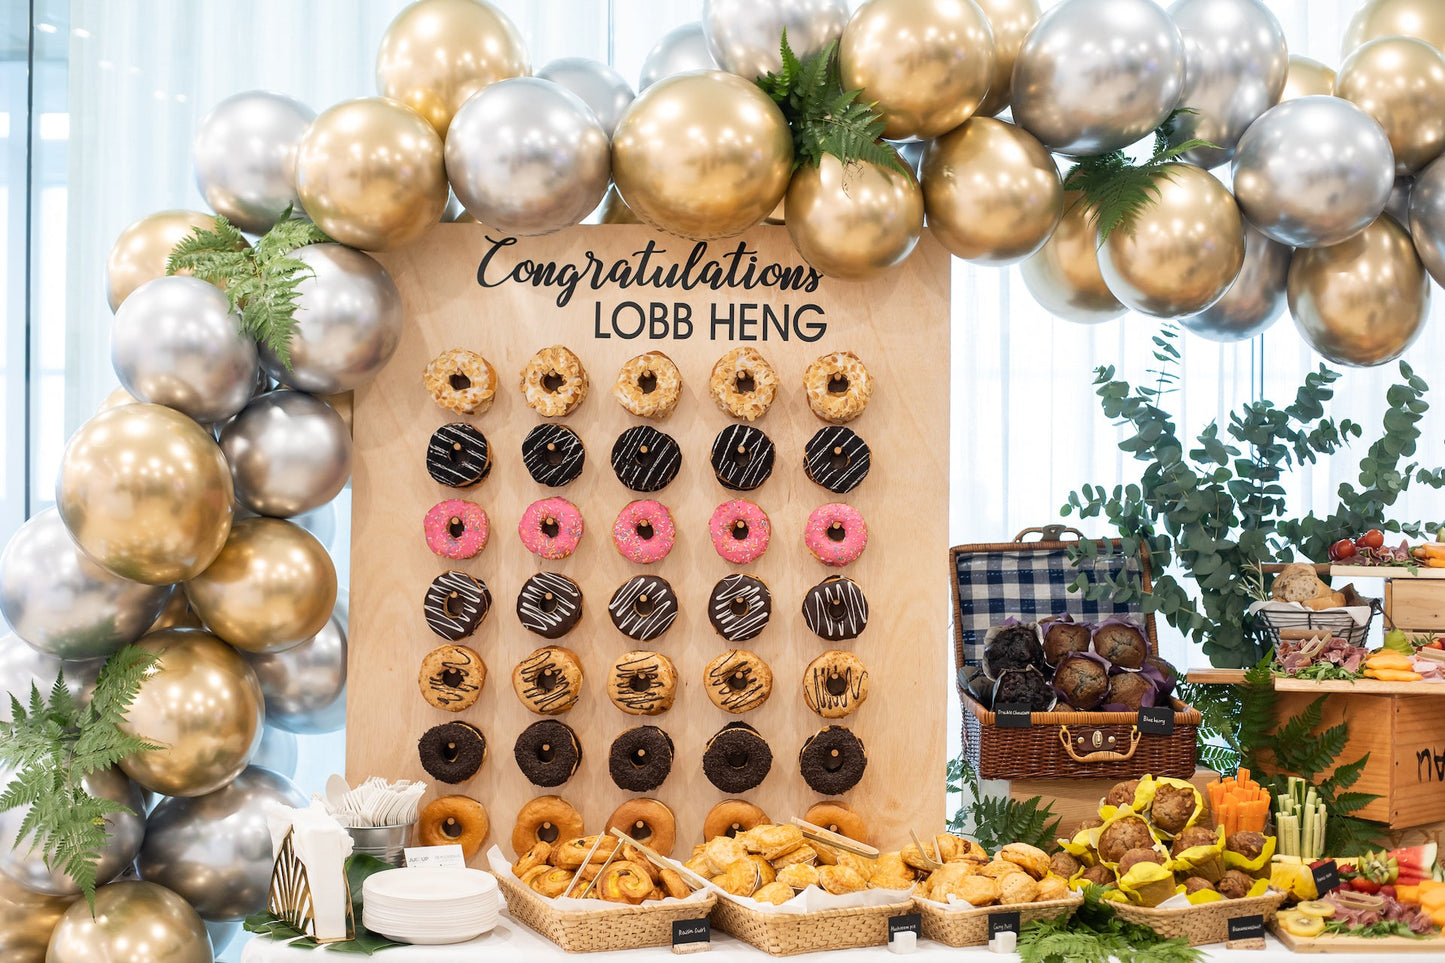 Canapés & Light Bites Catering - Deluxe Set (from $640 for 20pax)